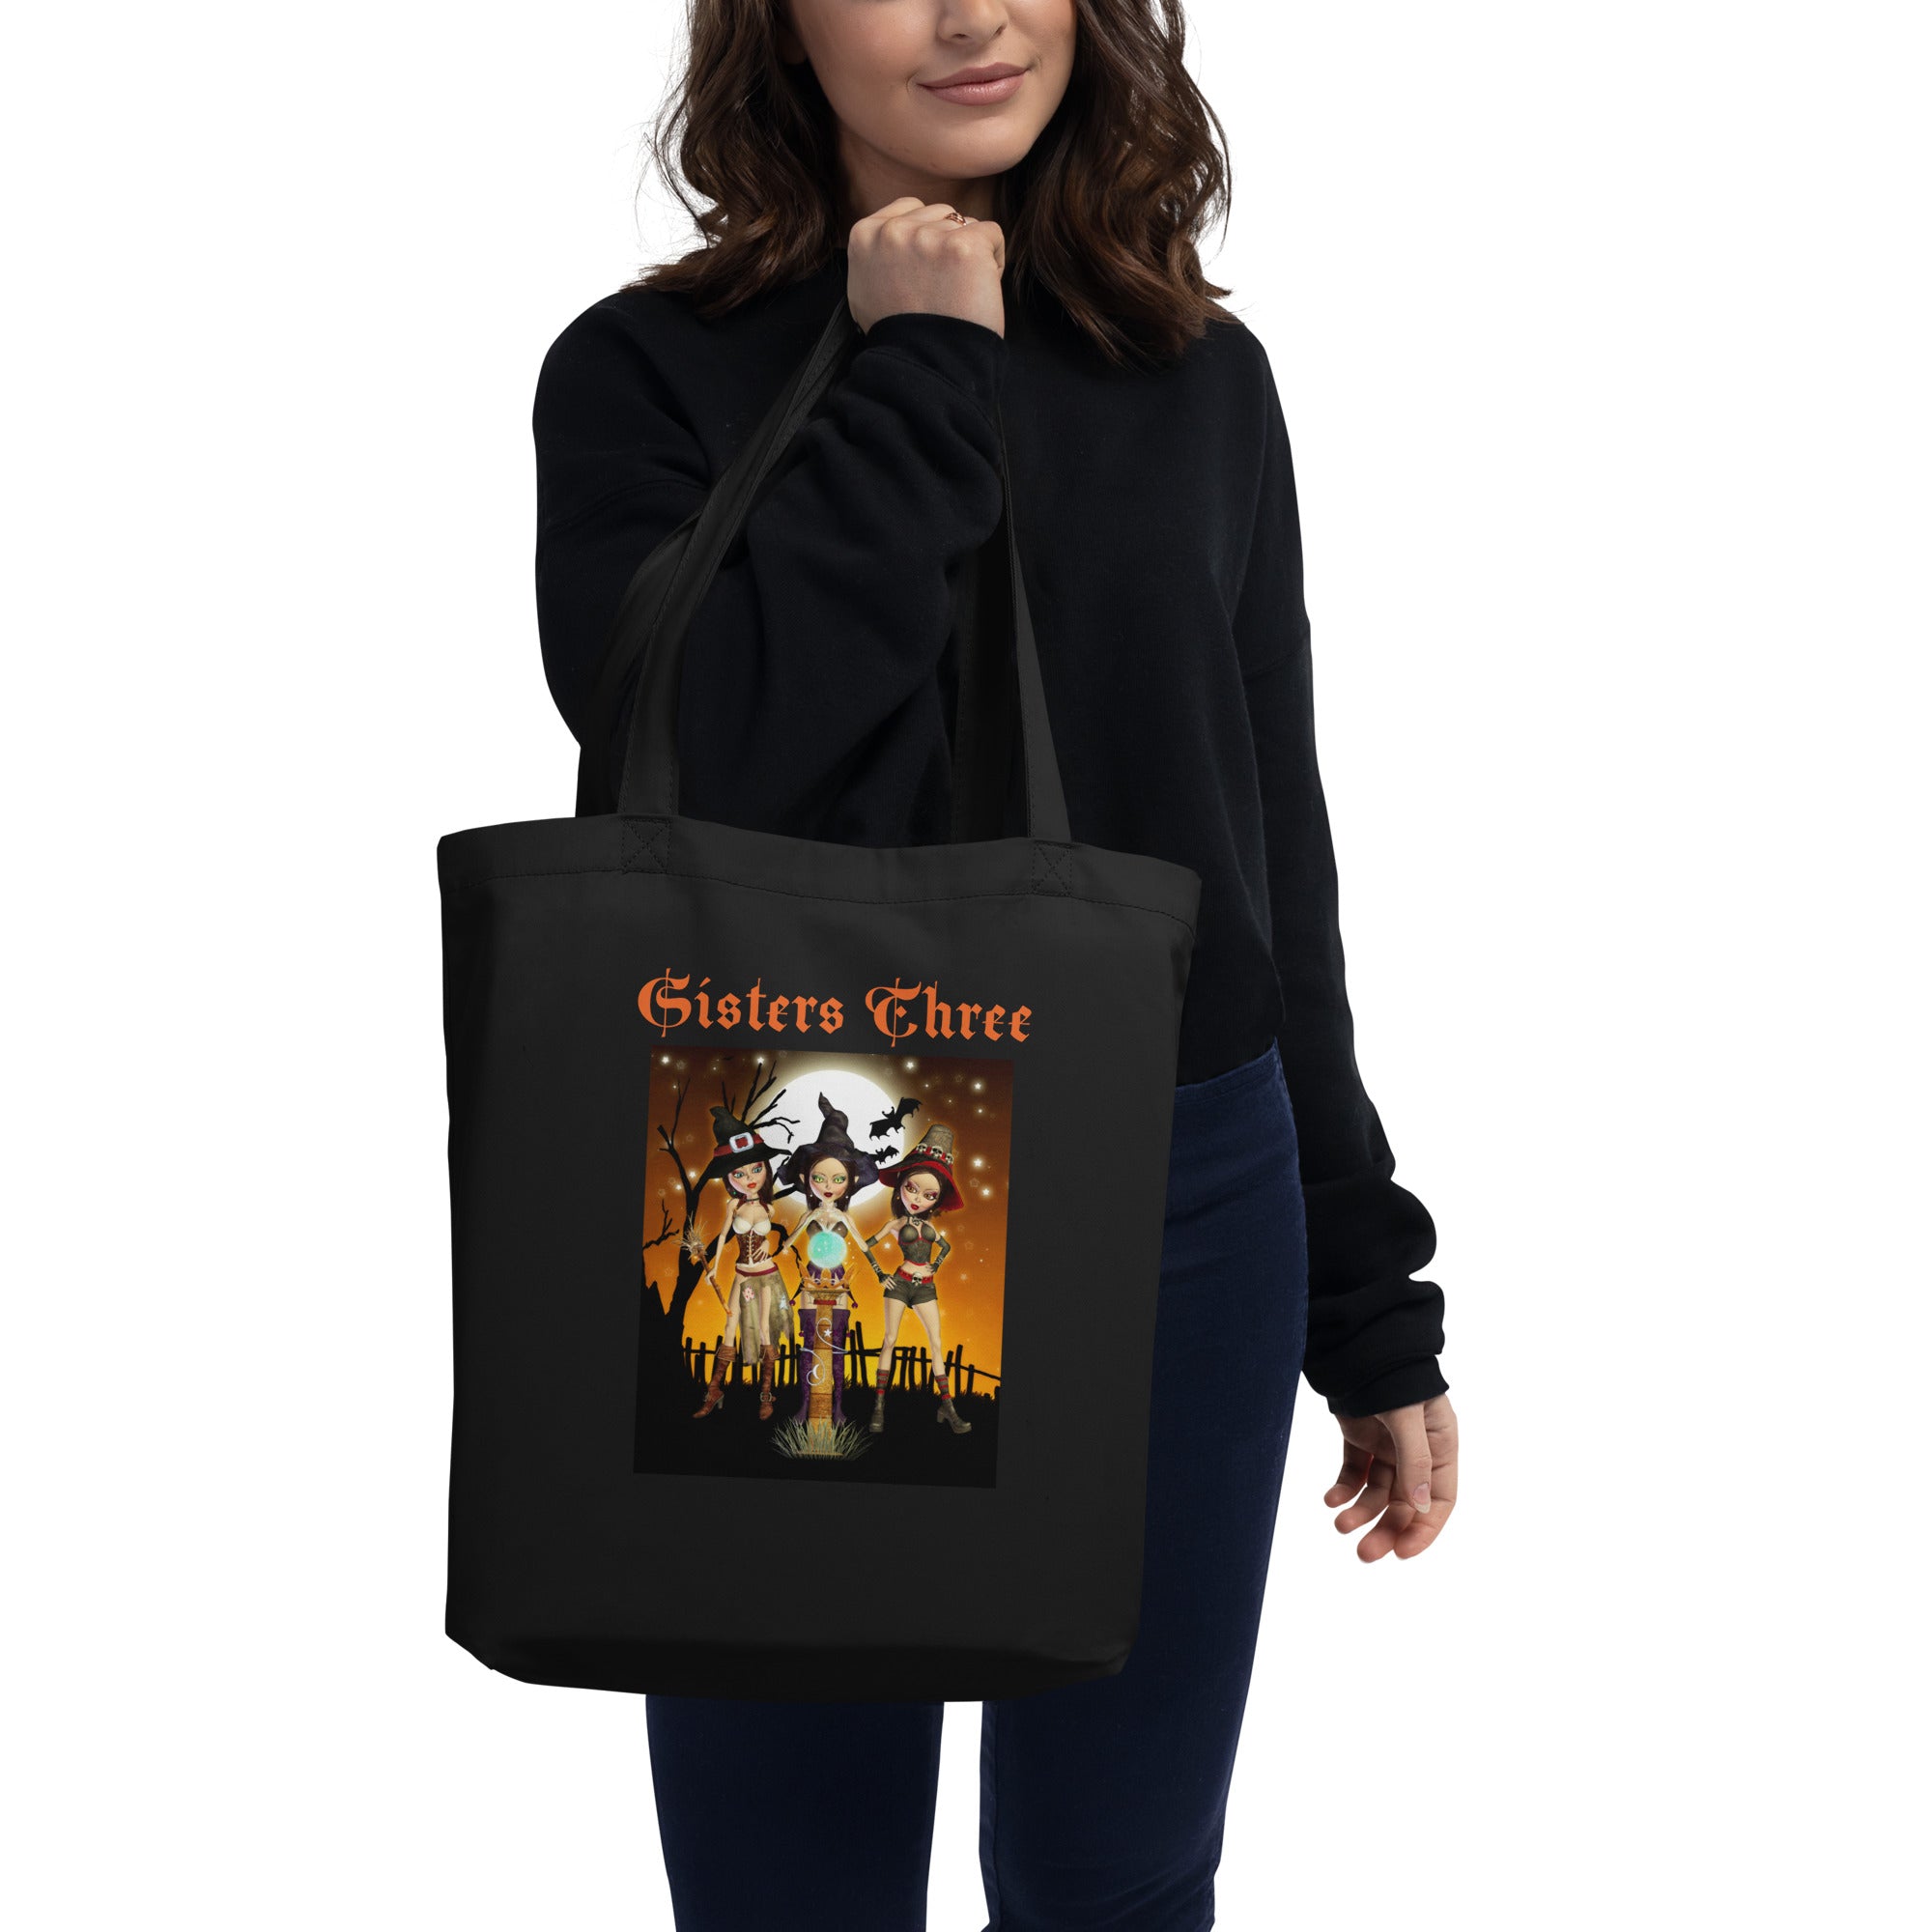 Sisters Three Witch Art Eco Tote Bag by Donna Lisa